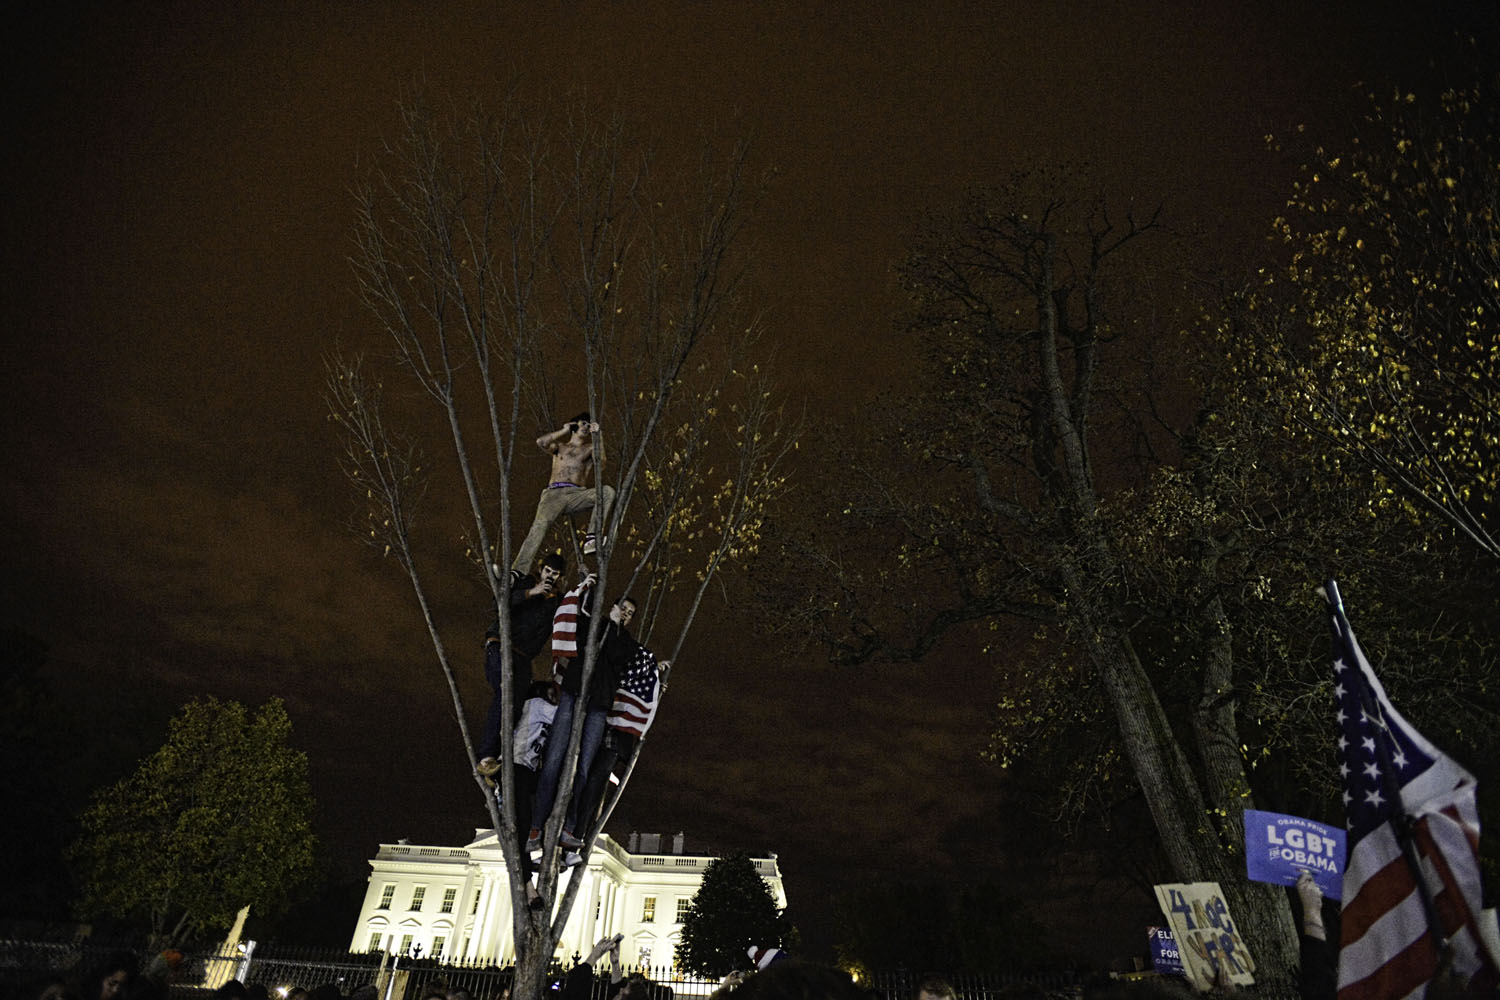 Image: Nov. 6, 2012. Obama supporters celebrate victory outside the White House.